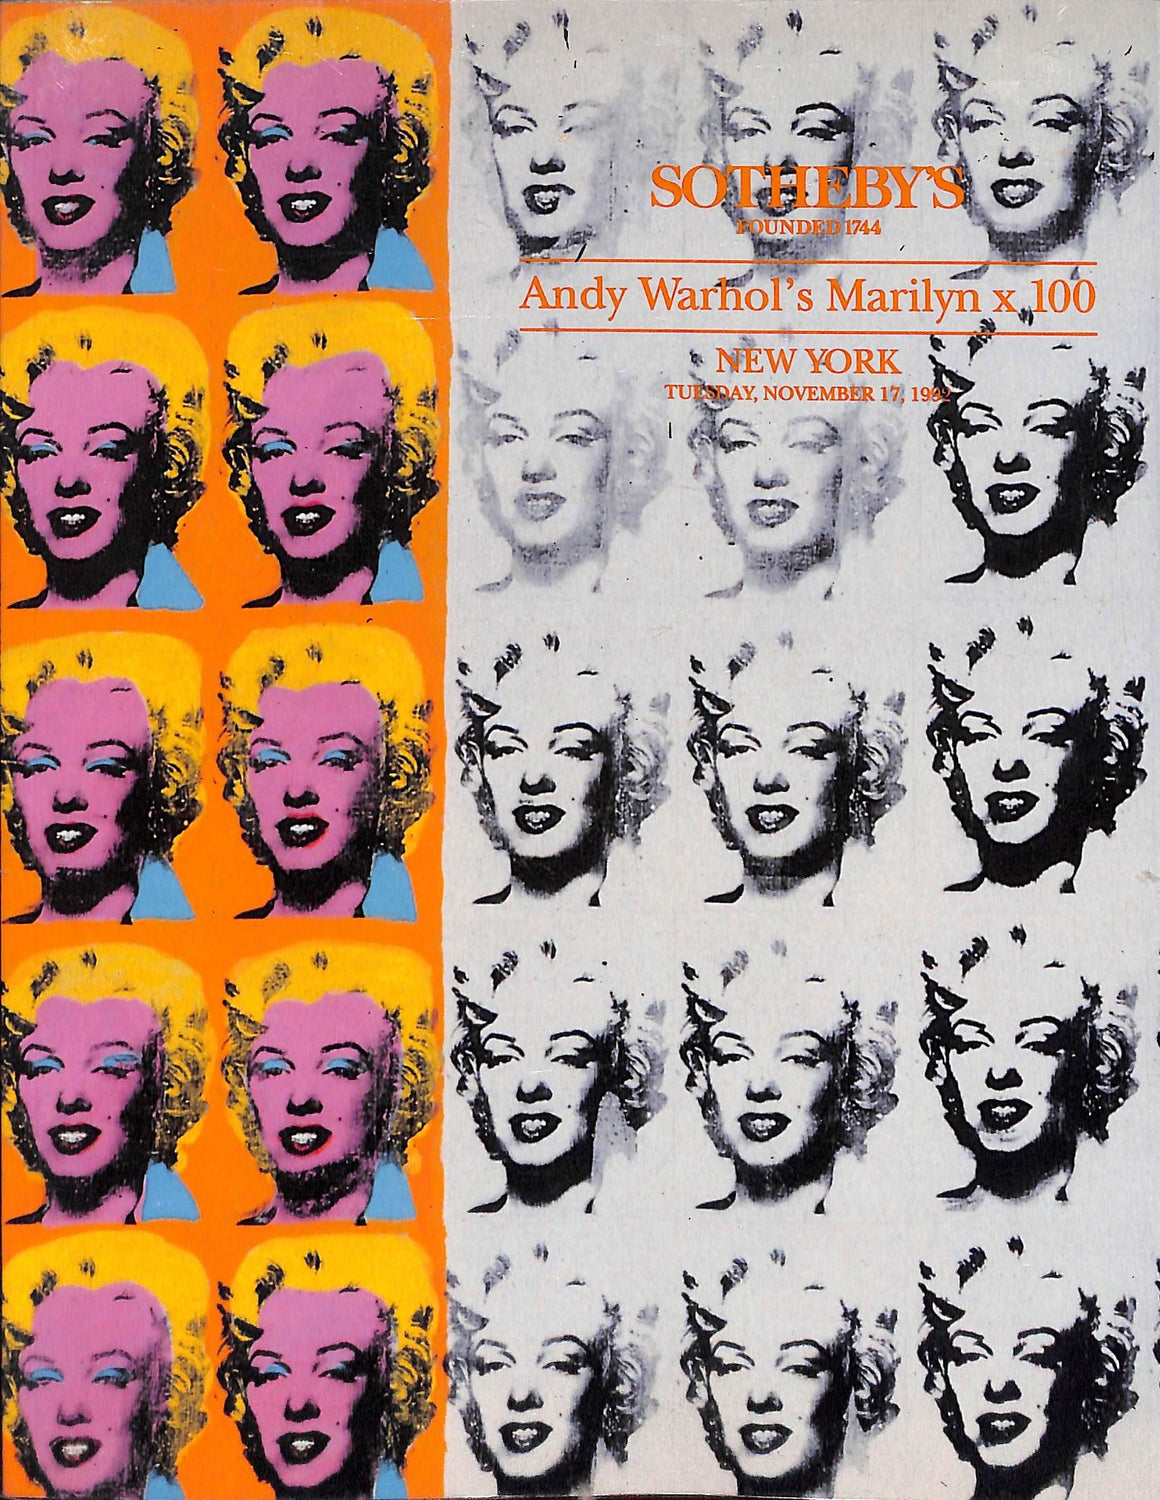 "Andy Warhol's Marilyn x 100" 1992 Sotheby's